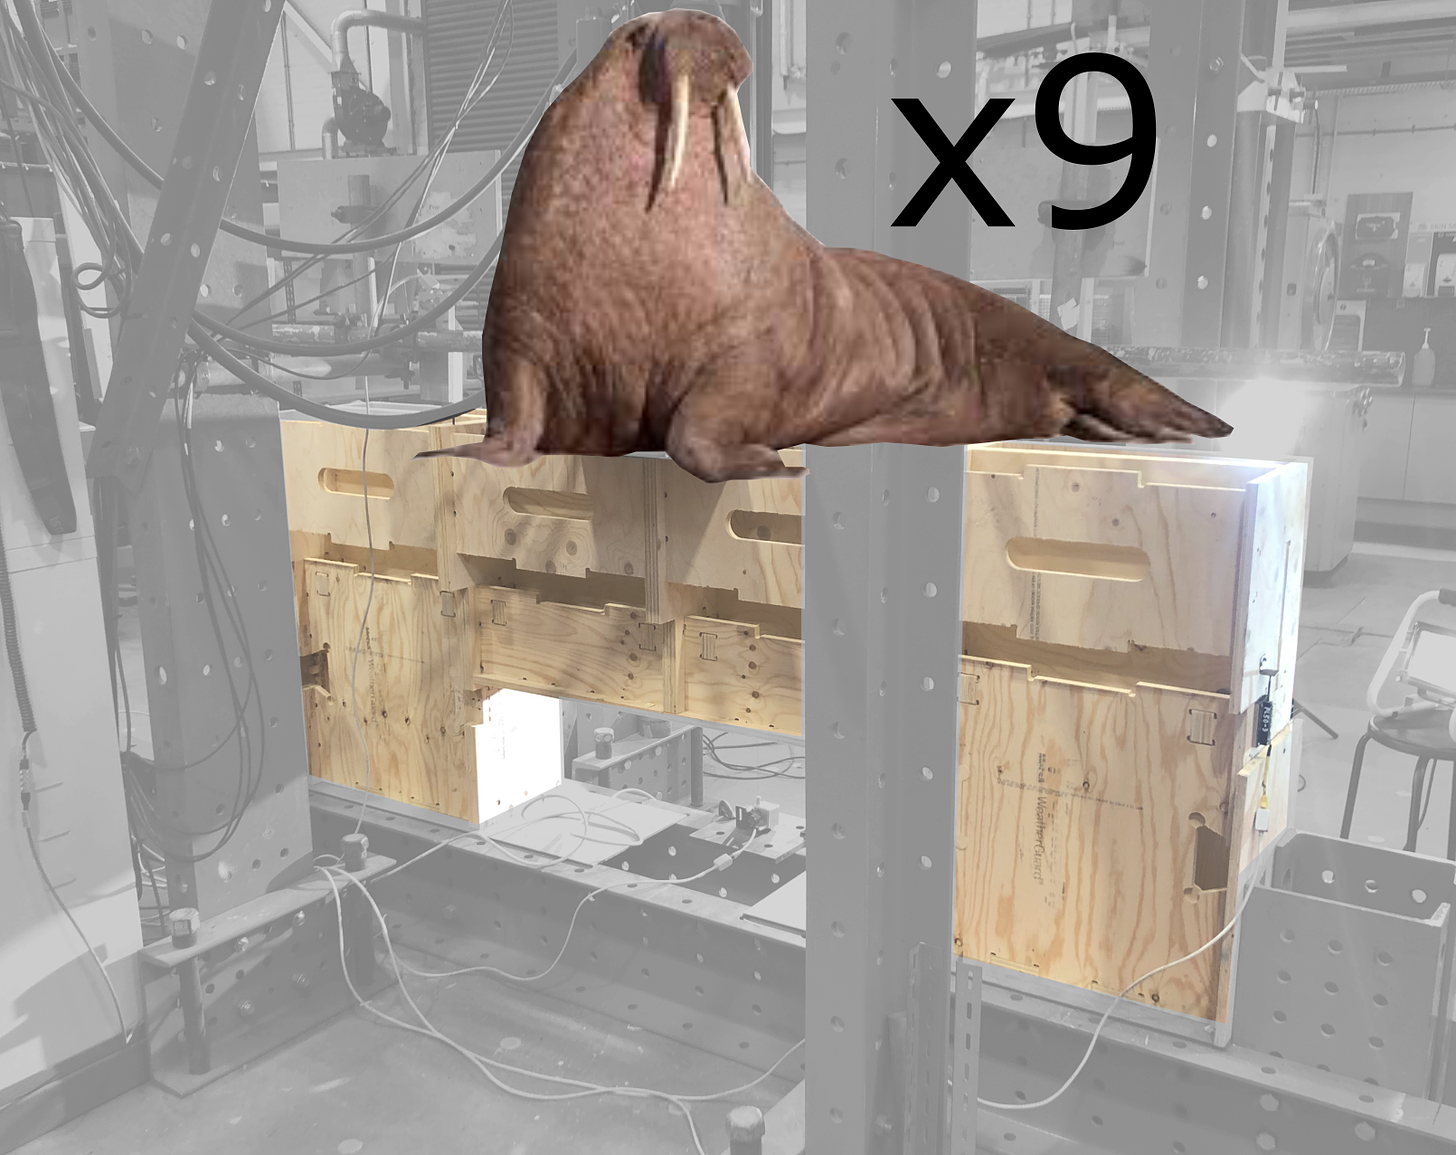 Image of lintel block about to be tested. A large walrus and the number 9 have been photoshopped on top of the block to show that the block can take the wight of 9 walruses before breaking.